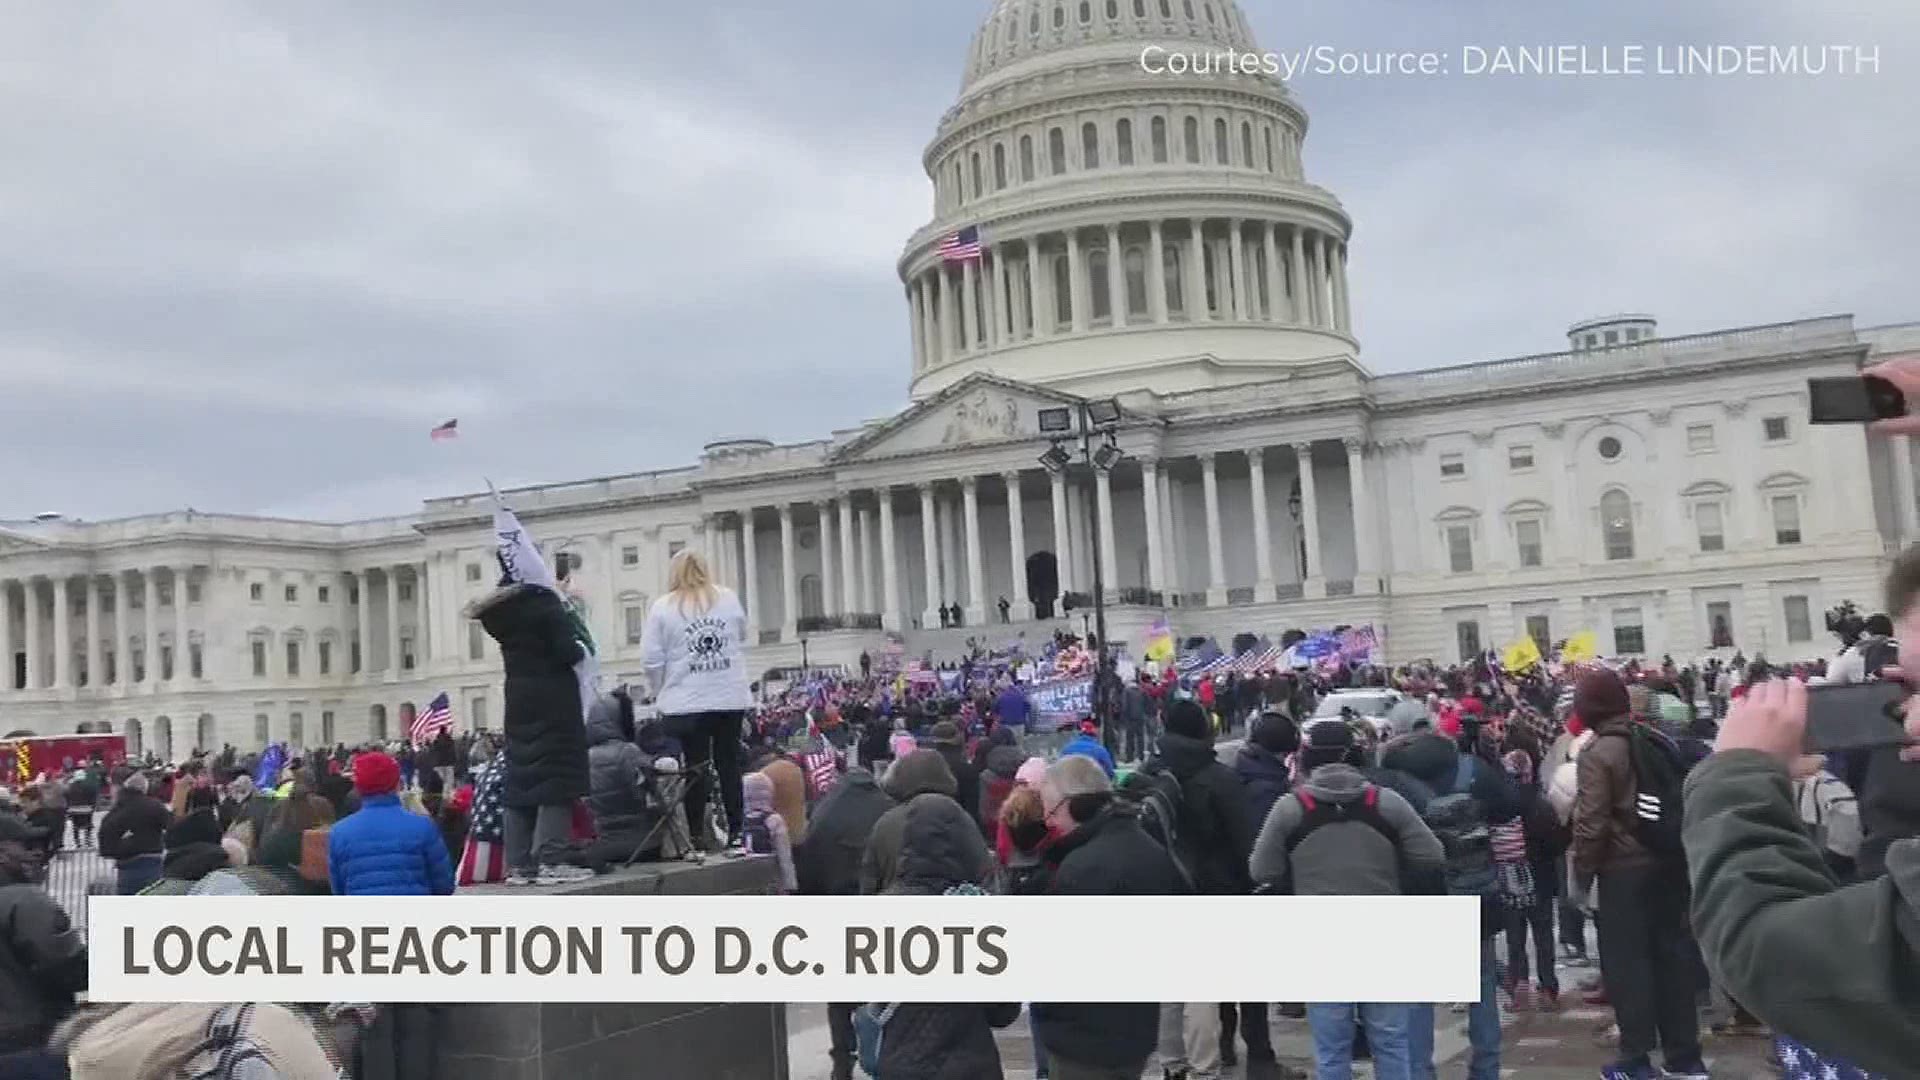 Any peaceful protest was largely overshadowed by the rioting inside the Capitol, which has been condemned by many state, national and international leaders.